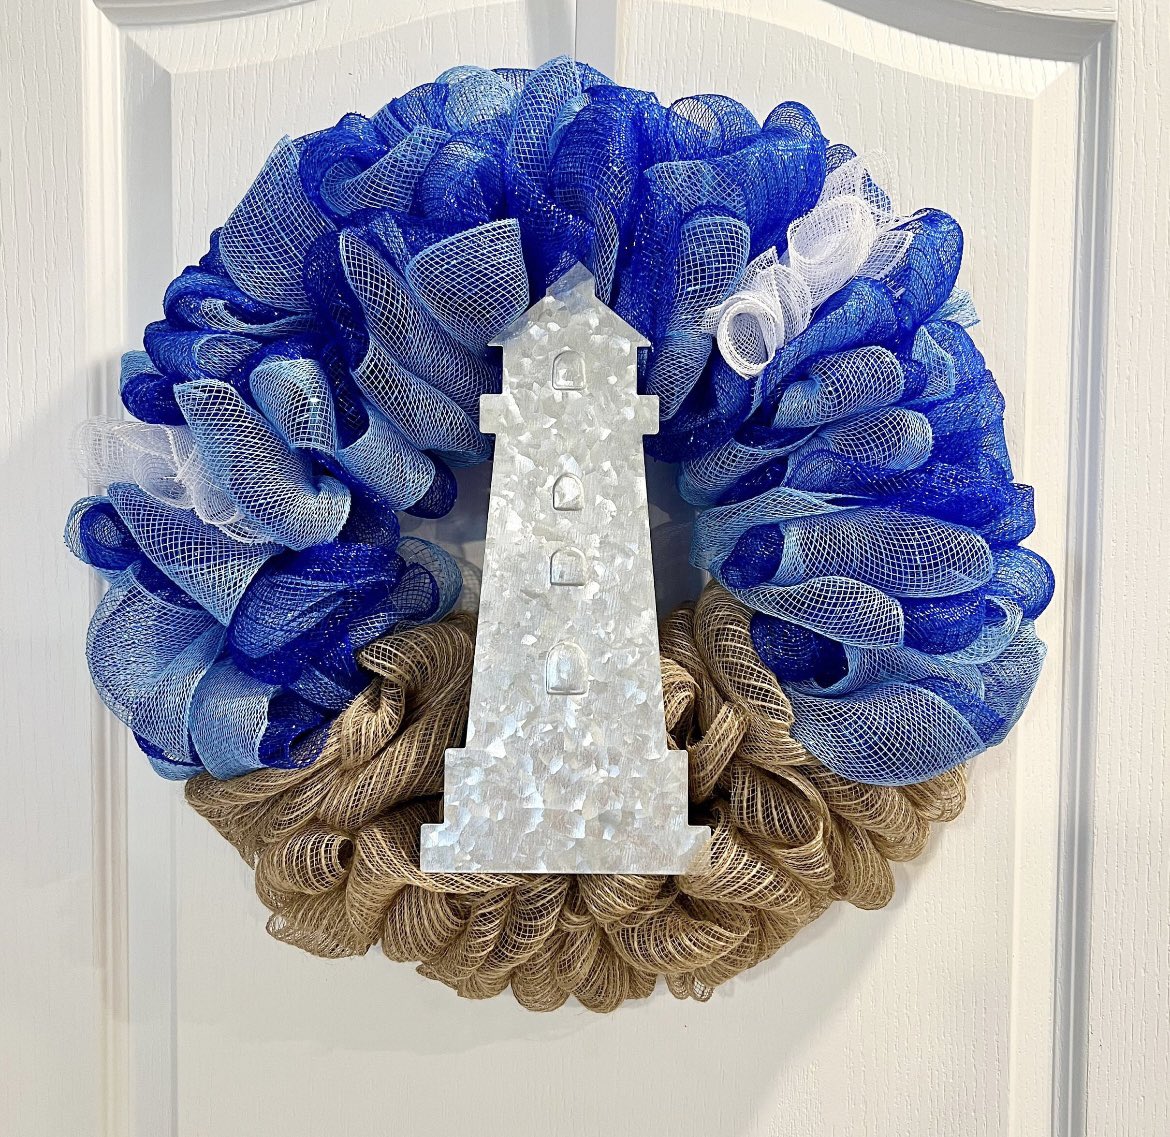 Happy Friday everyone!! The lighthouse wreath was inspired by the two beautiful Cape Henry lighthouses in Virginia Beach…and my all time favorite beach spot.  I keep one of these on my own door all summer long to remind me of home. 🏖️ #beachdays #lighthouses #virginiabeach